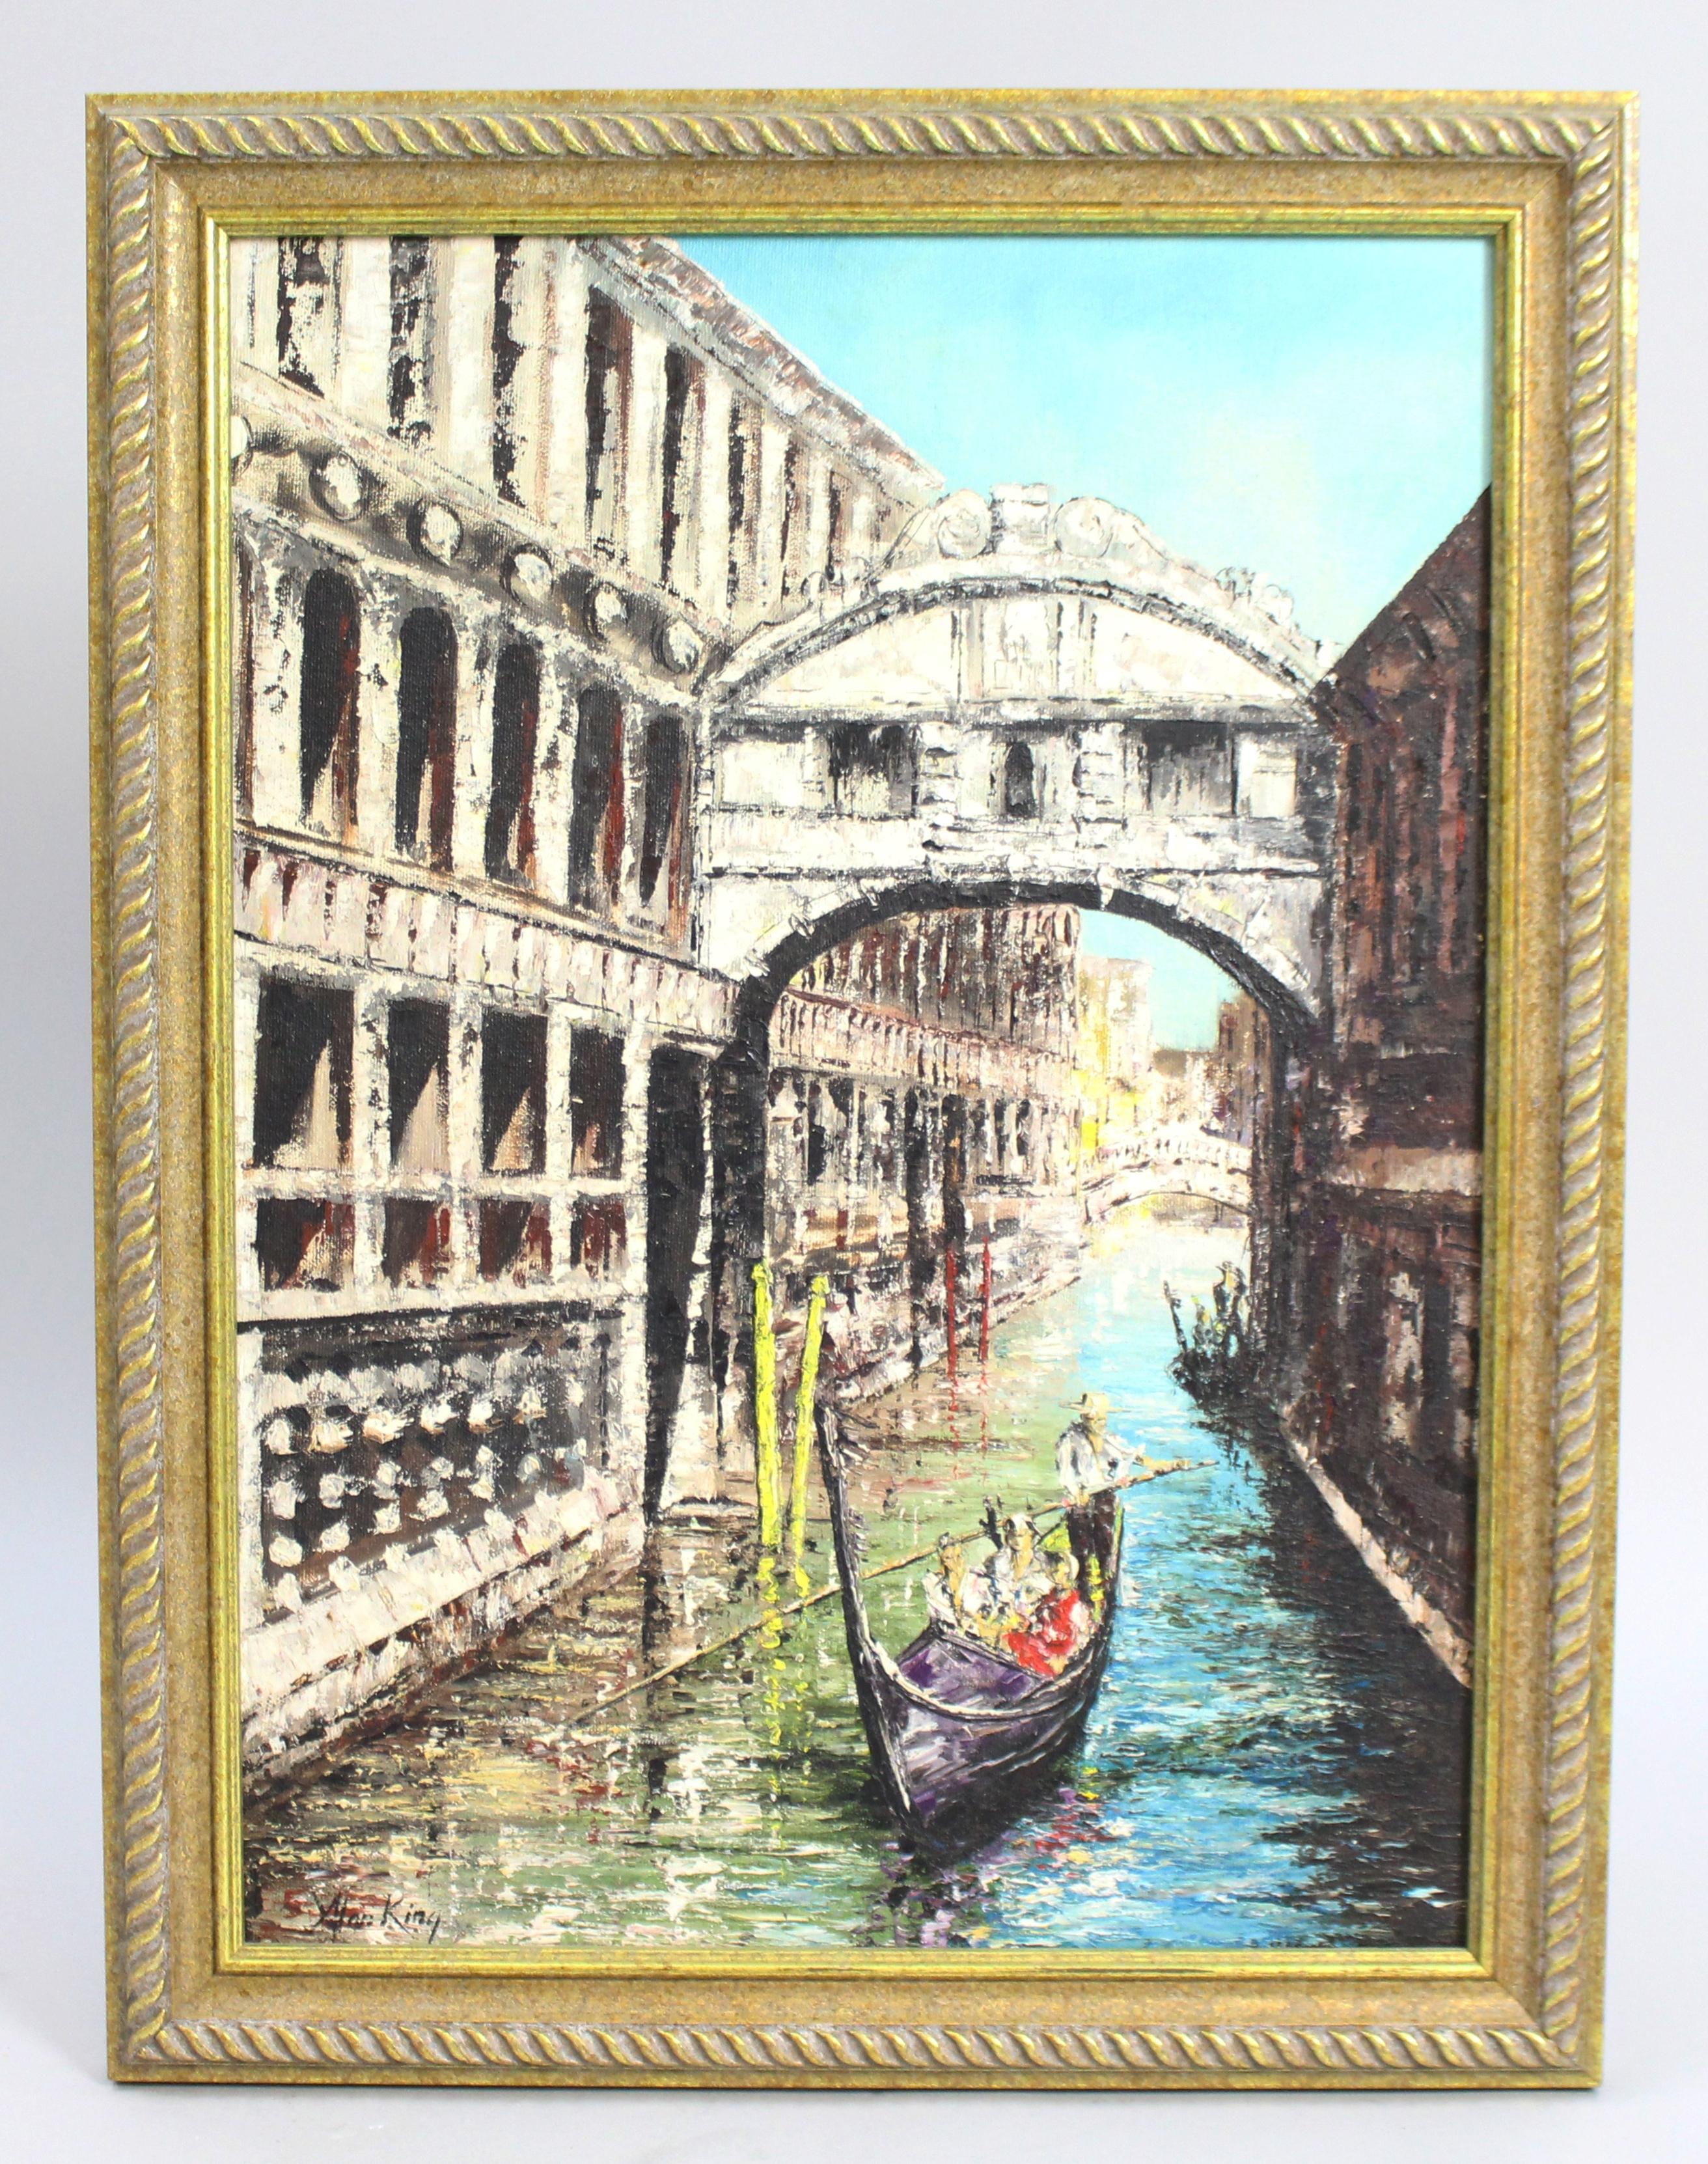 Bridge of Sighs Venice by Alan King oil on board 


Period mid/late 20th c., dated to the reverse 1971

Artist Alan King (AKin of Malvern)

Medium oil on board

Size 48 x 63 cm / 19 x 24 3/4 in

Signed bottom left by the artist

Frame